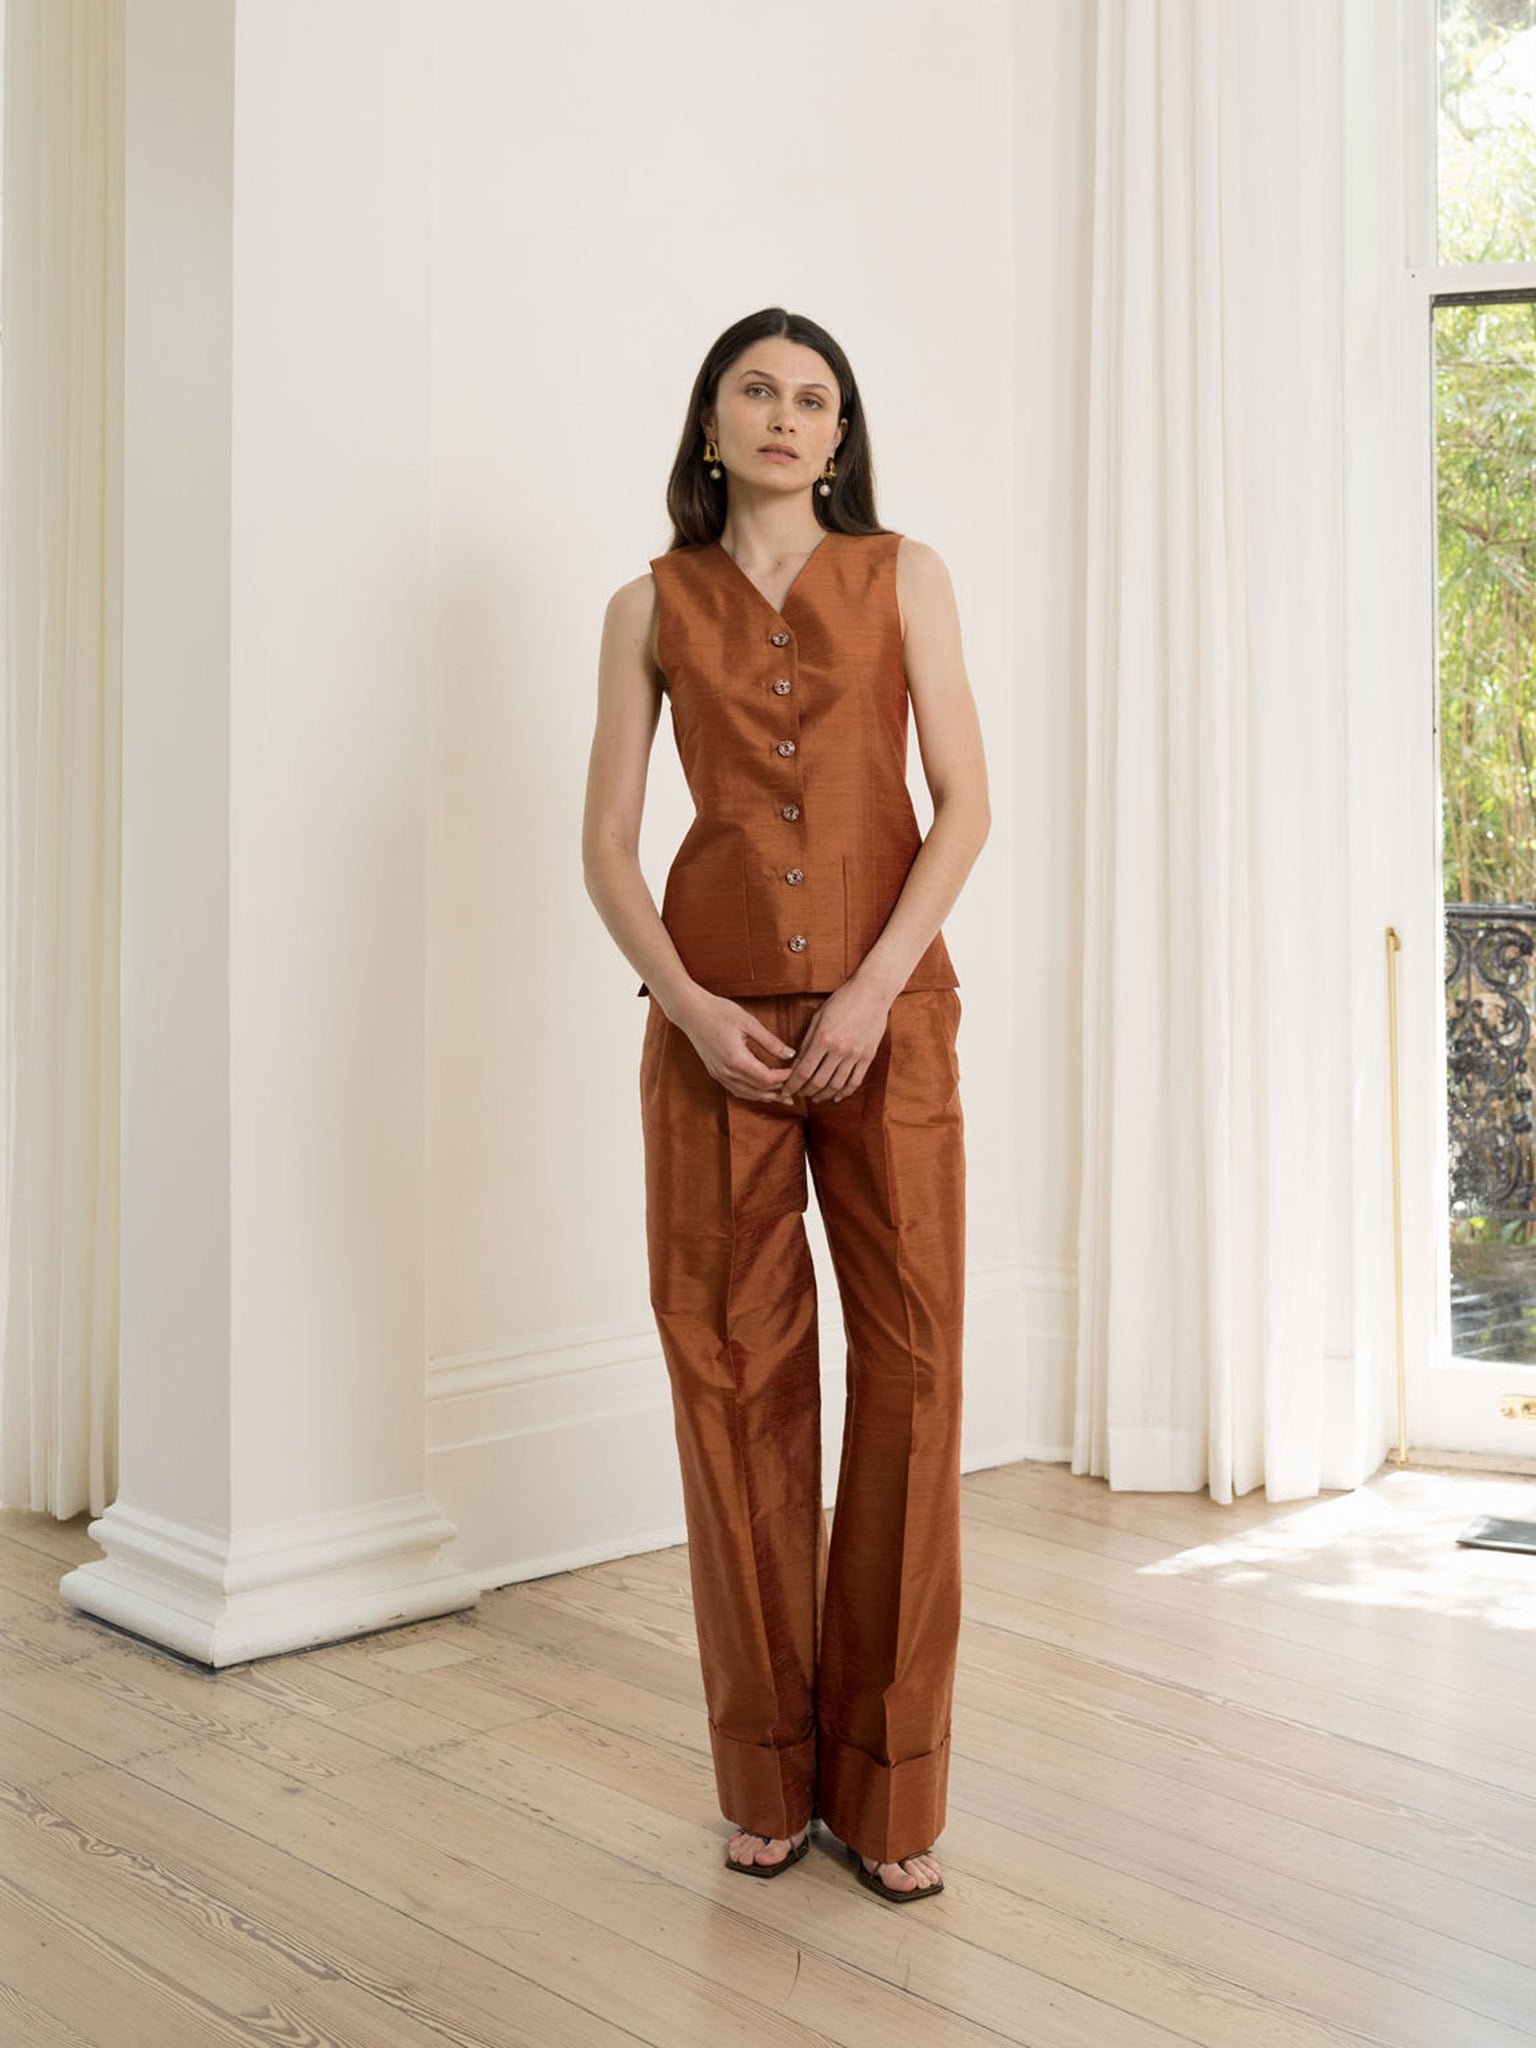 The Vested Shell in Terracotta Silk